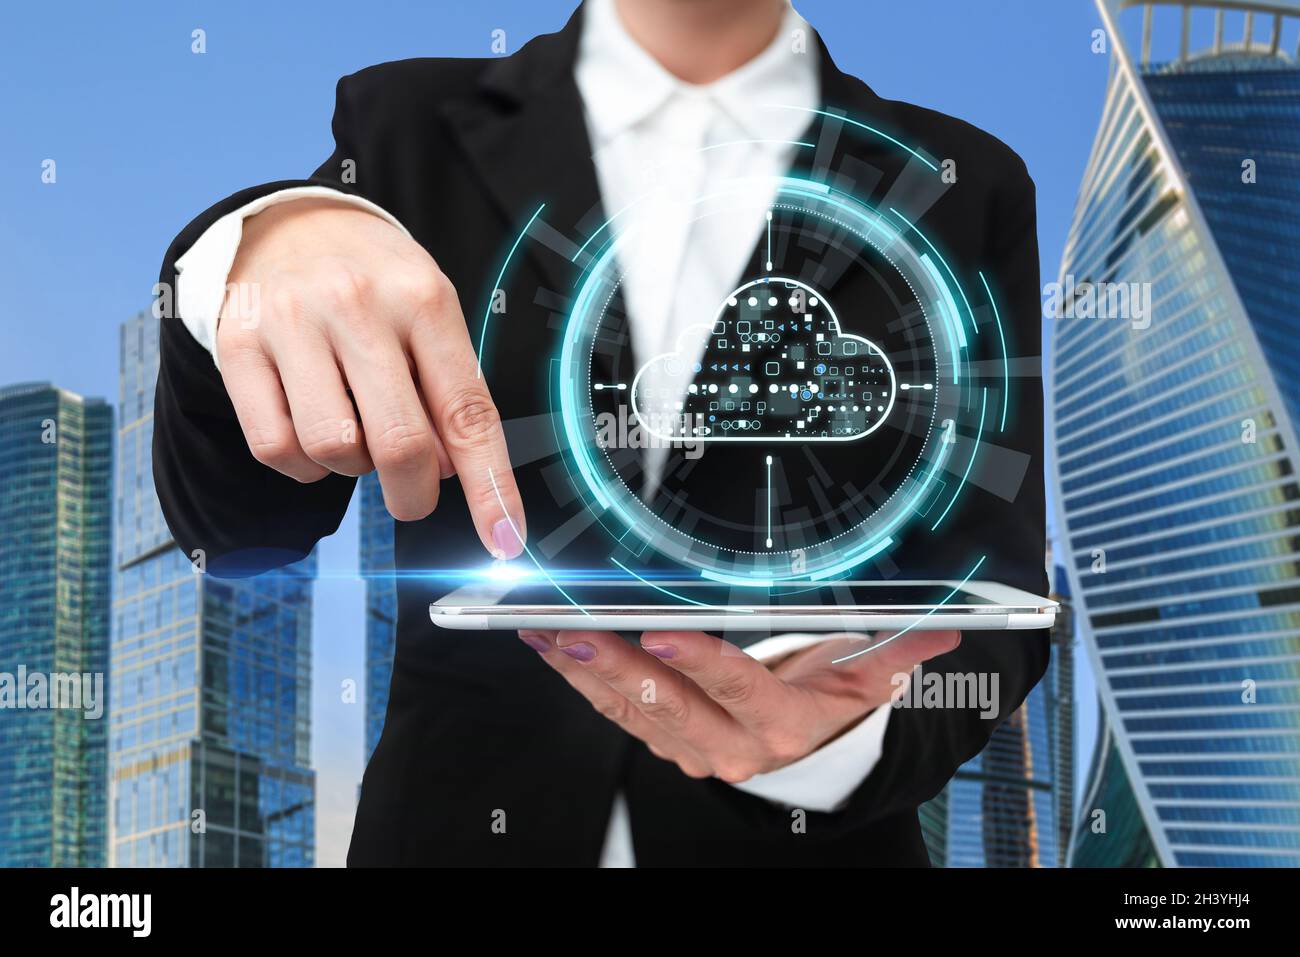 Woman In A Suit Pointing The Top Screen Of Tablet Showing Futuristic Technology. Businesswoman Wearing Uniform Spotting Into Pad Stock Photo